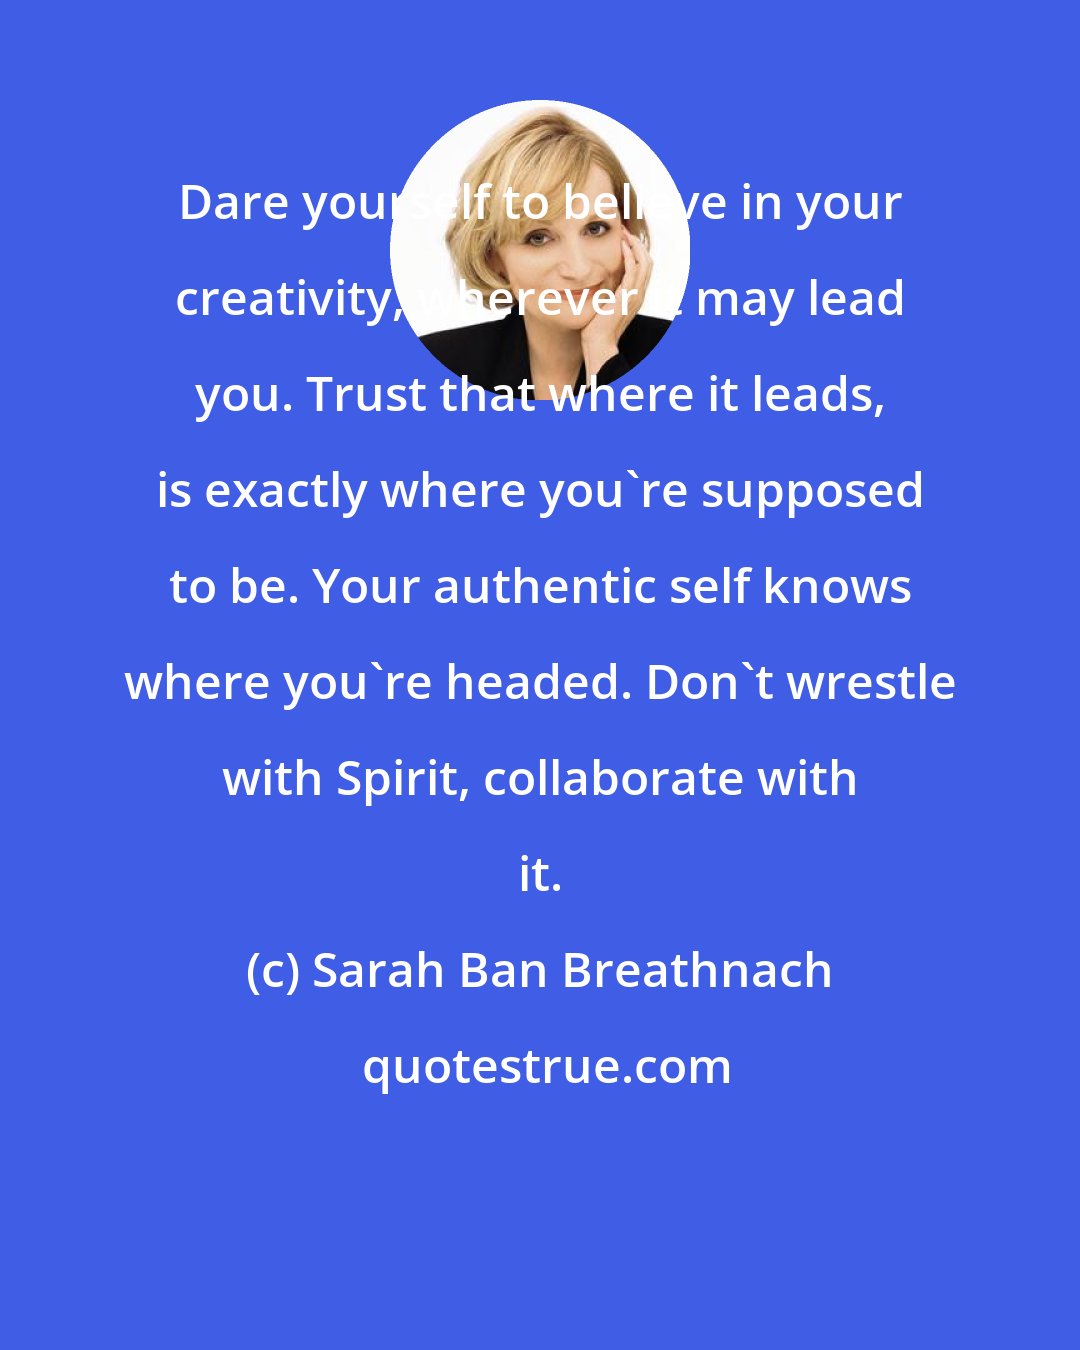 Sarah Ban Breathnach: Dare yourself to believe in your creativity, wherever it may lead you. Trust that where it leads, is exactly where you're supposed to be. Your authentic self knows where you're headed. Don't wrestle with Spirit, collaborate with it.